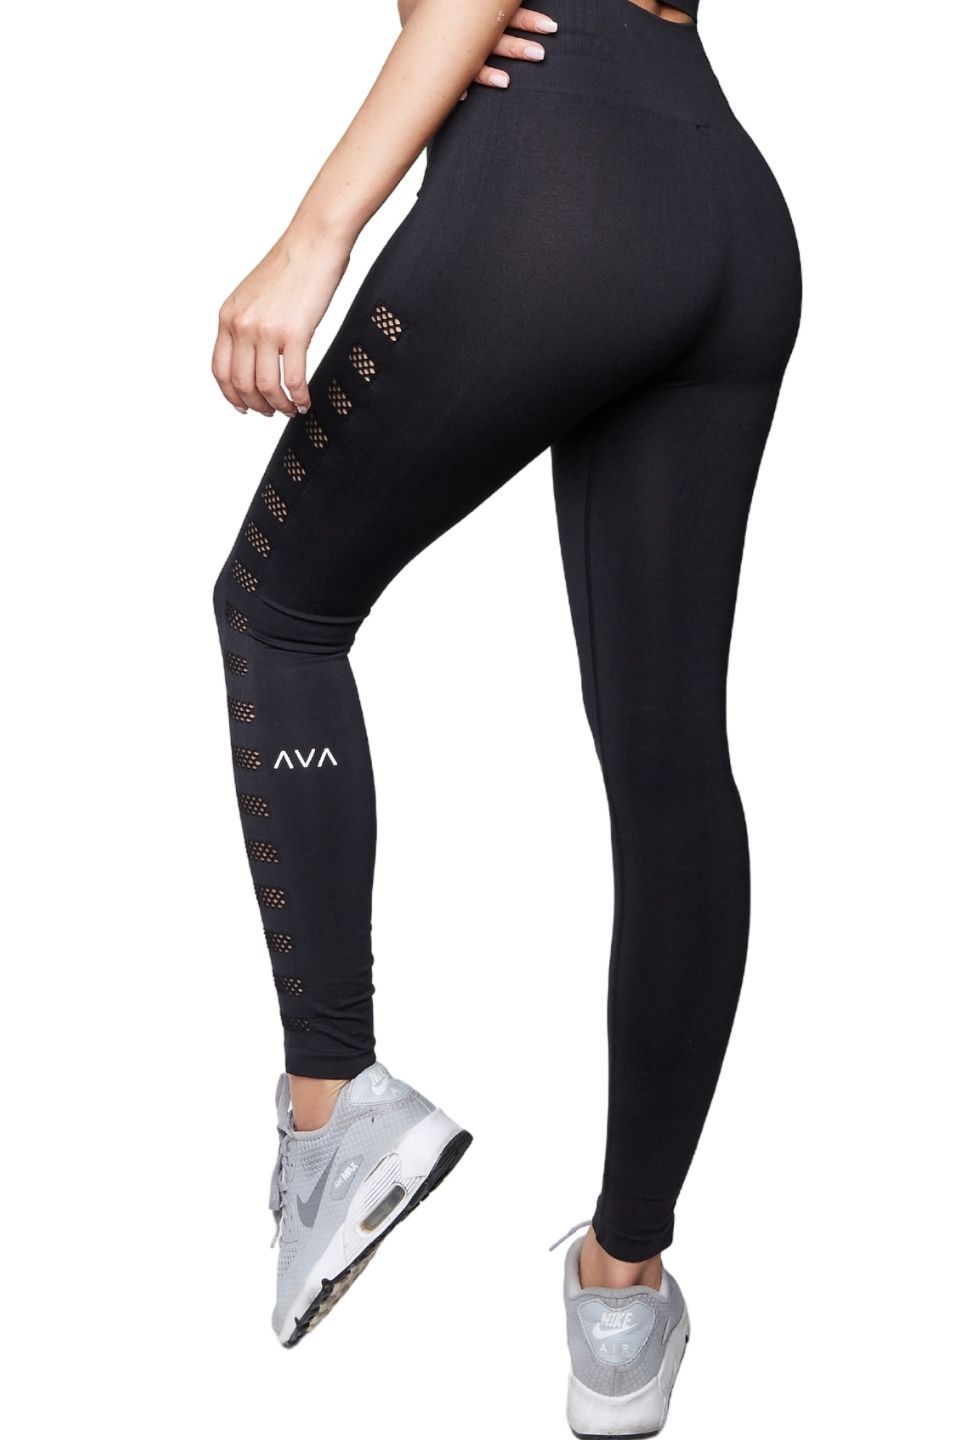  Savoy Active Women's Mesh Seamless High-Compression Leggings  with Ribbing Detail (Black) : Sports & Outdoors